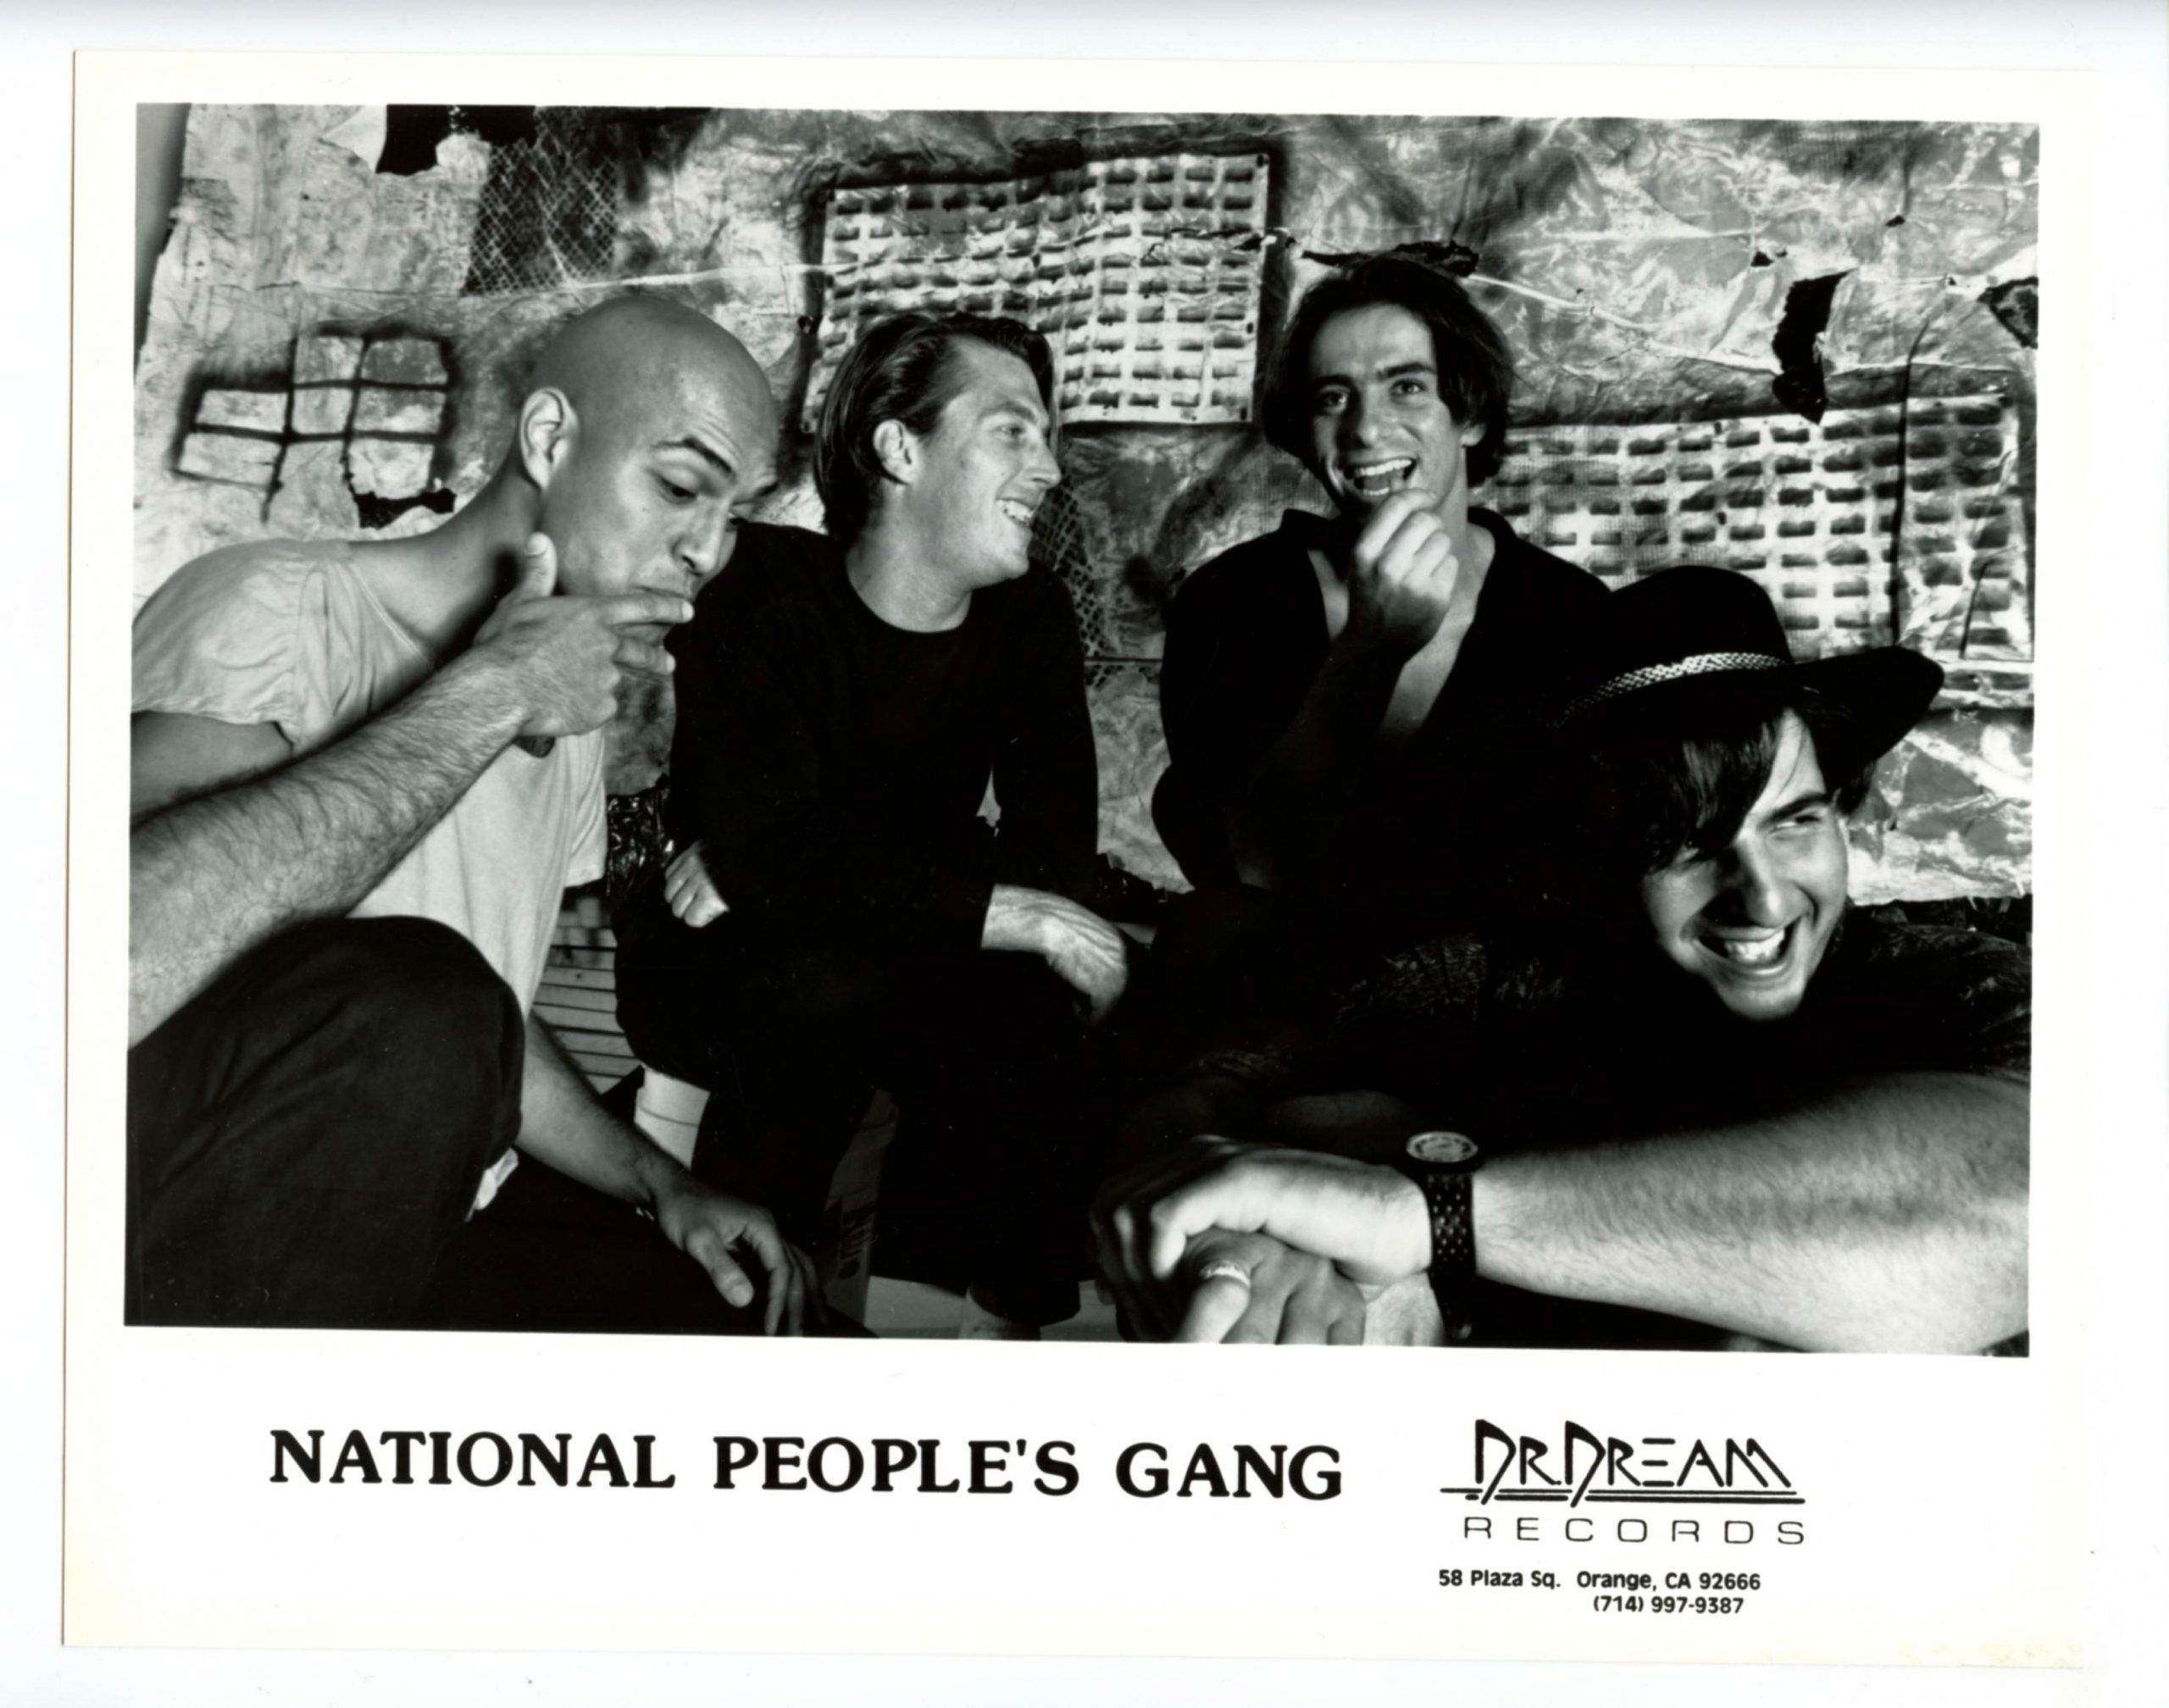 National Peoples Gang Photo 1980s Dr Dream Records